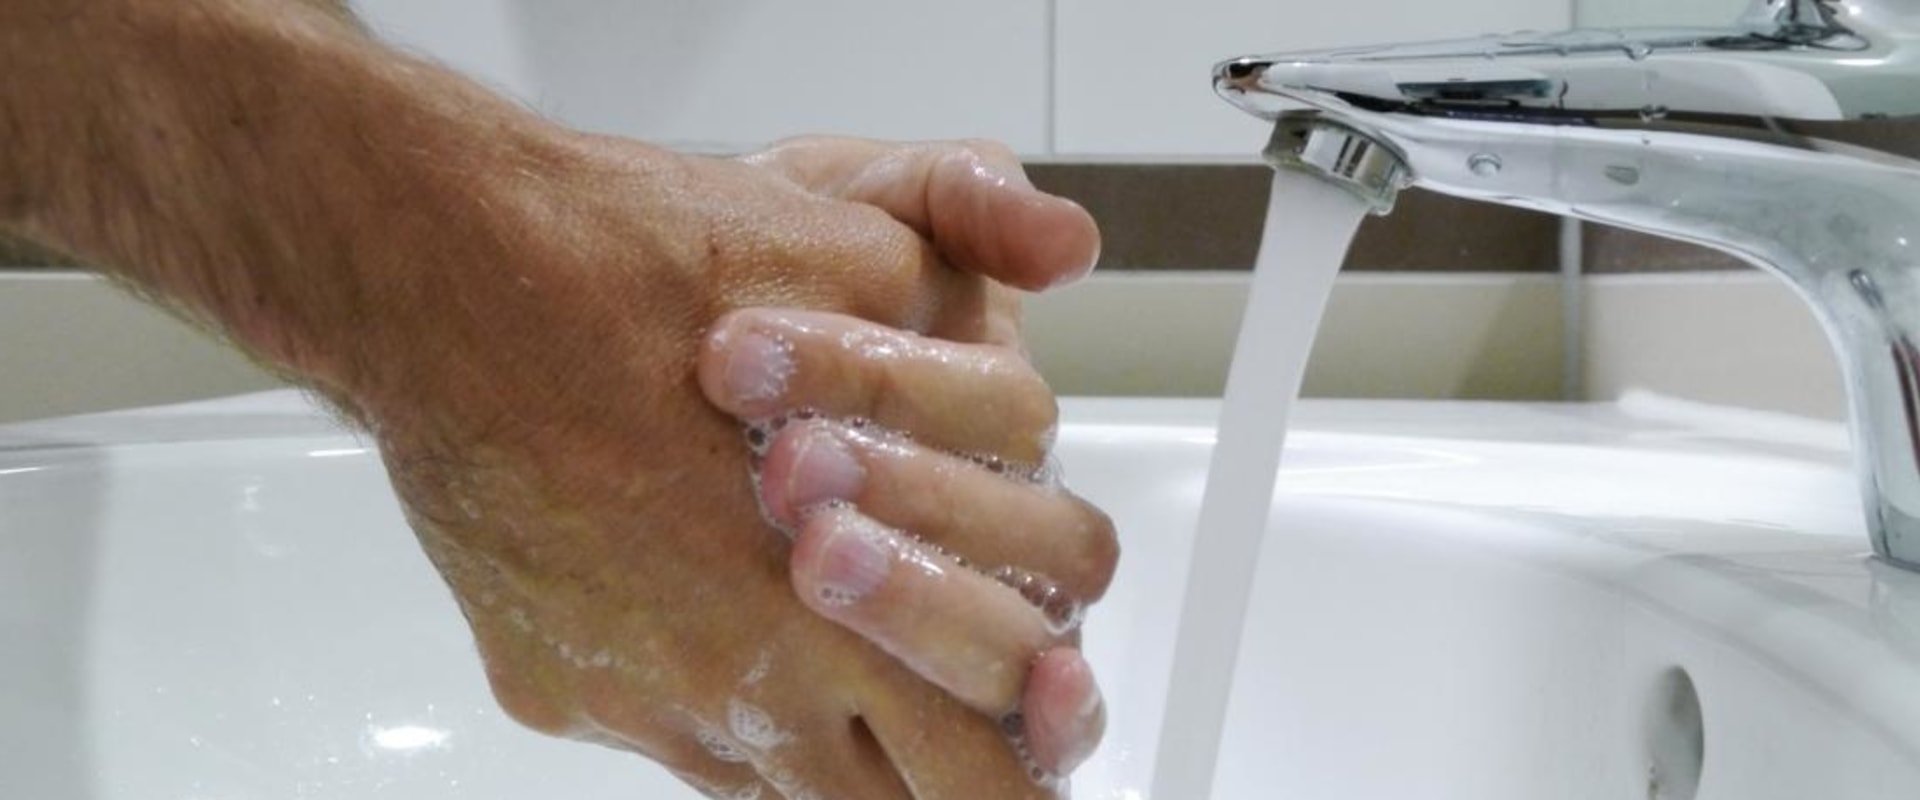 Risk of Infection with Poor Hygiene Practices